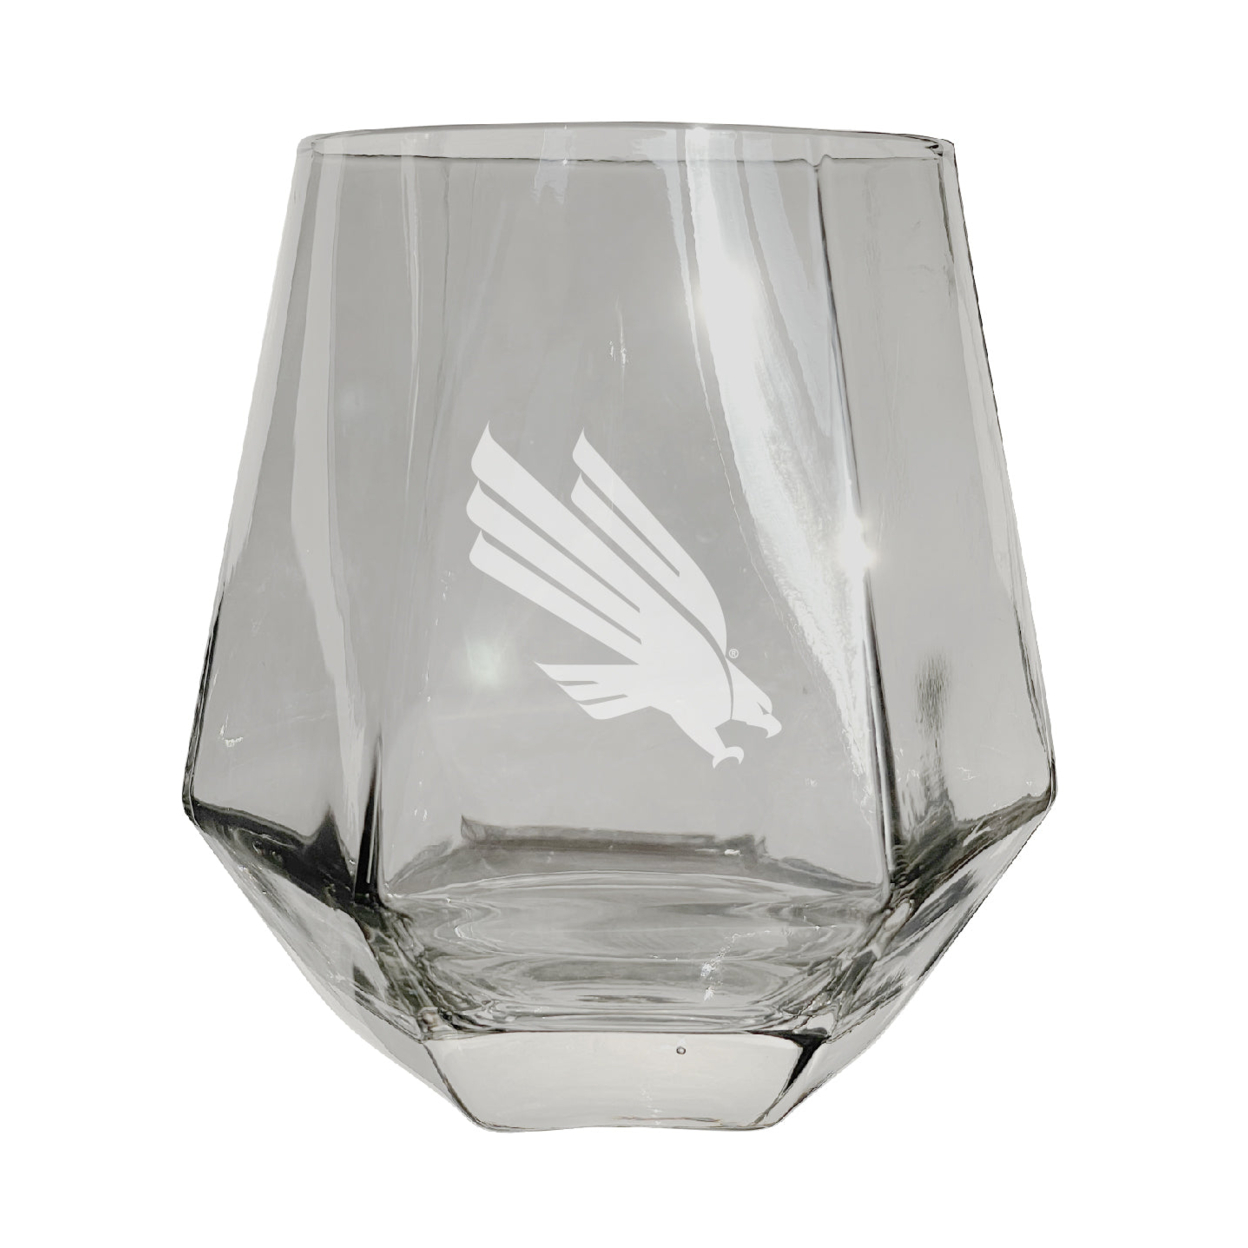 North Texas Etched Diamond Cut Stemless 10 Ounce Wine Glass Clear